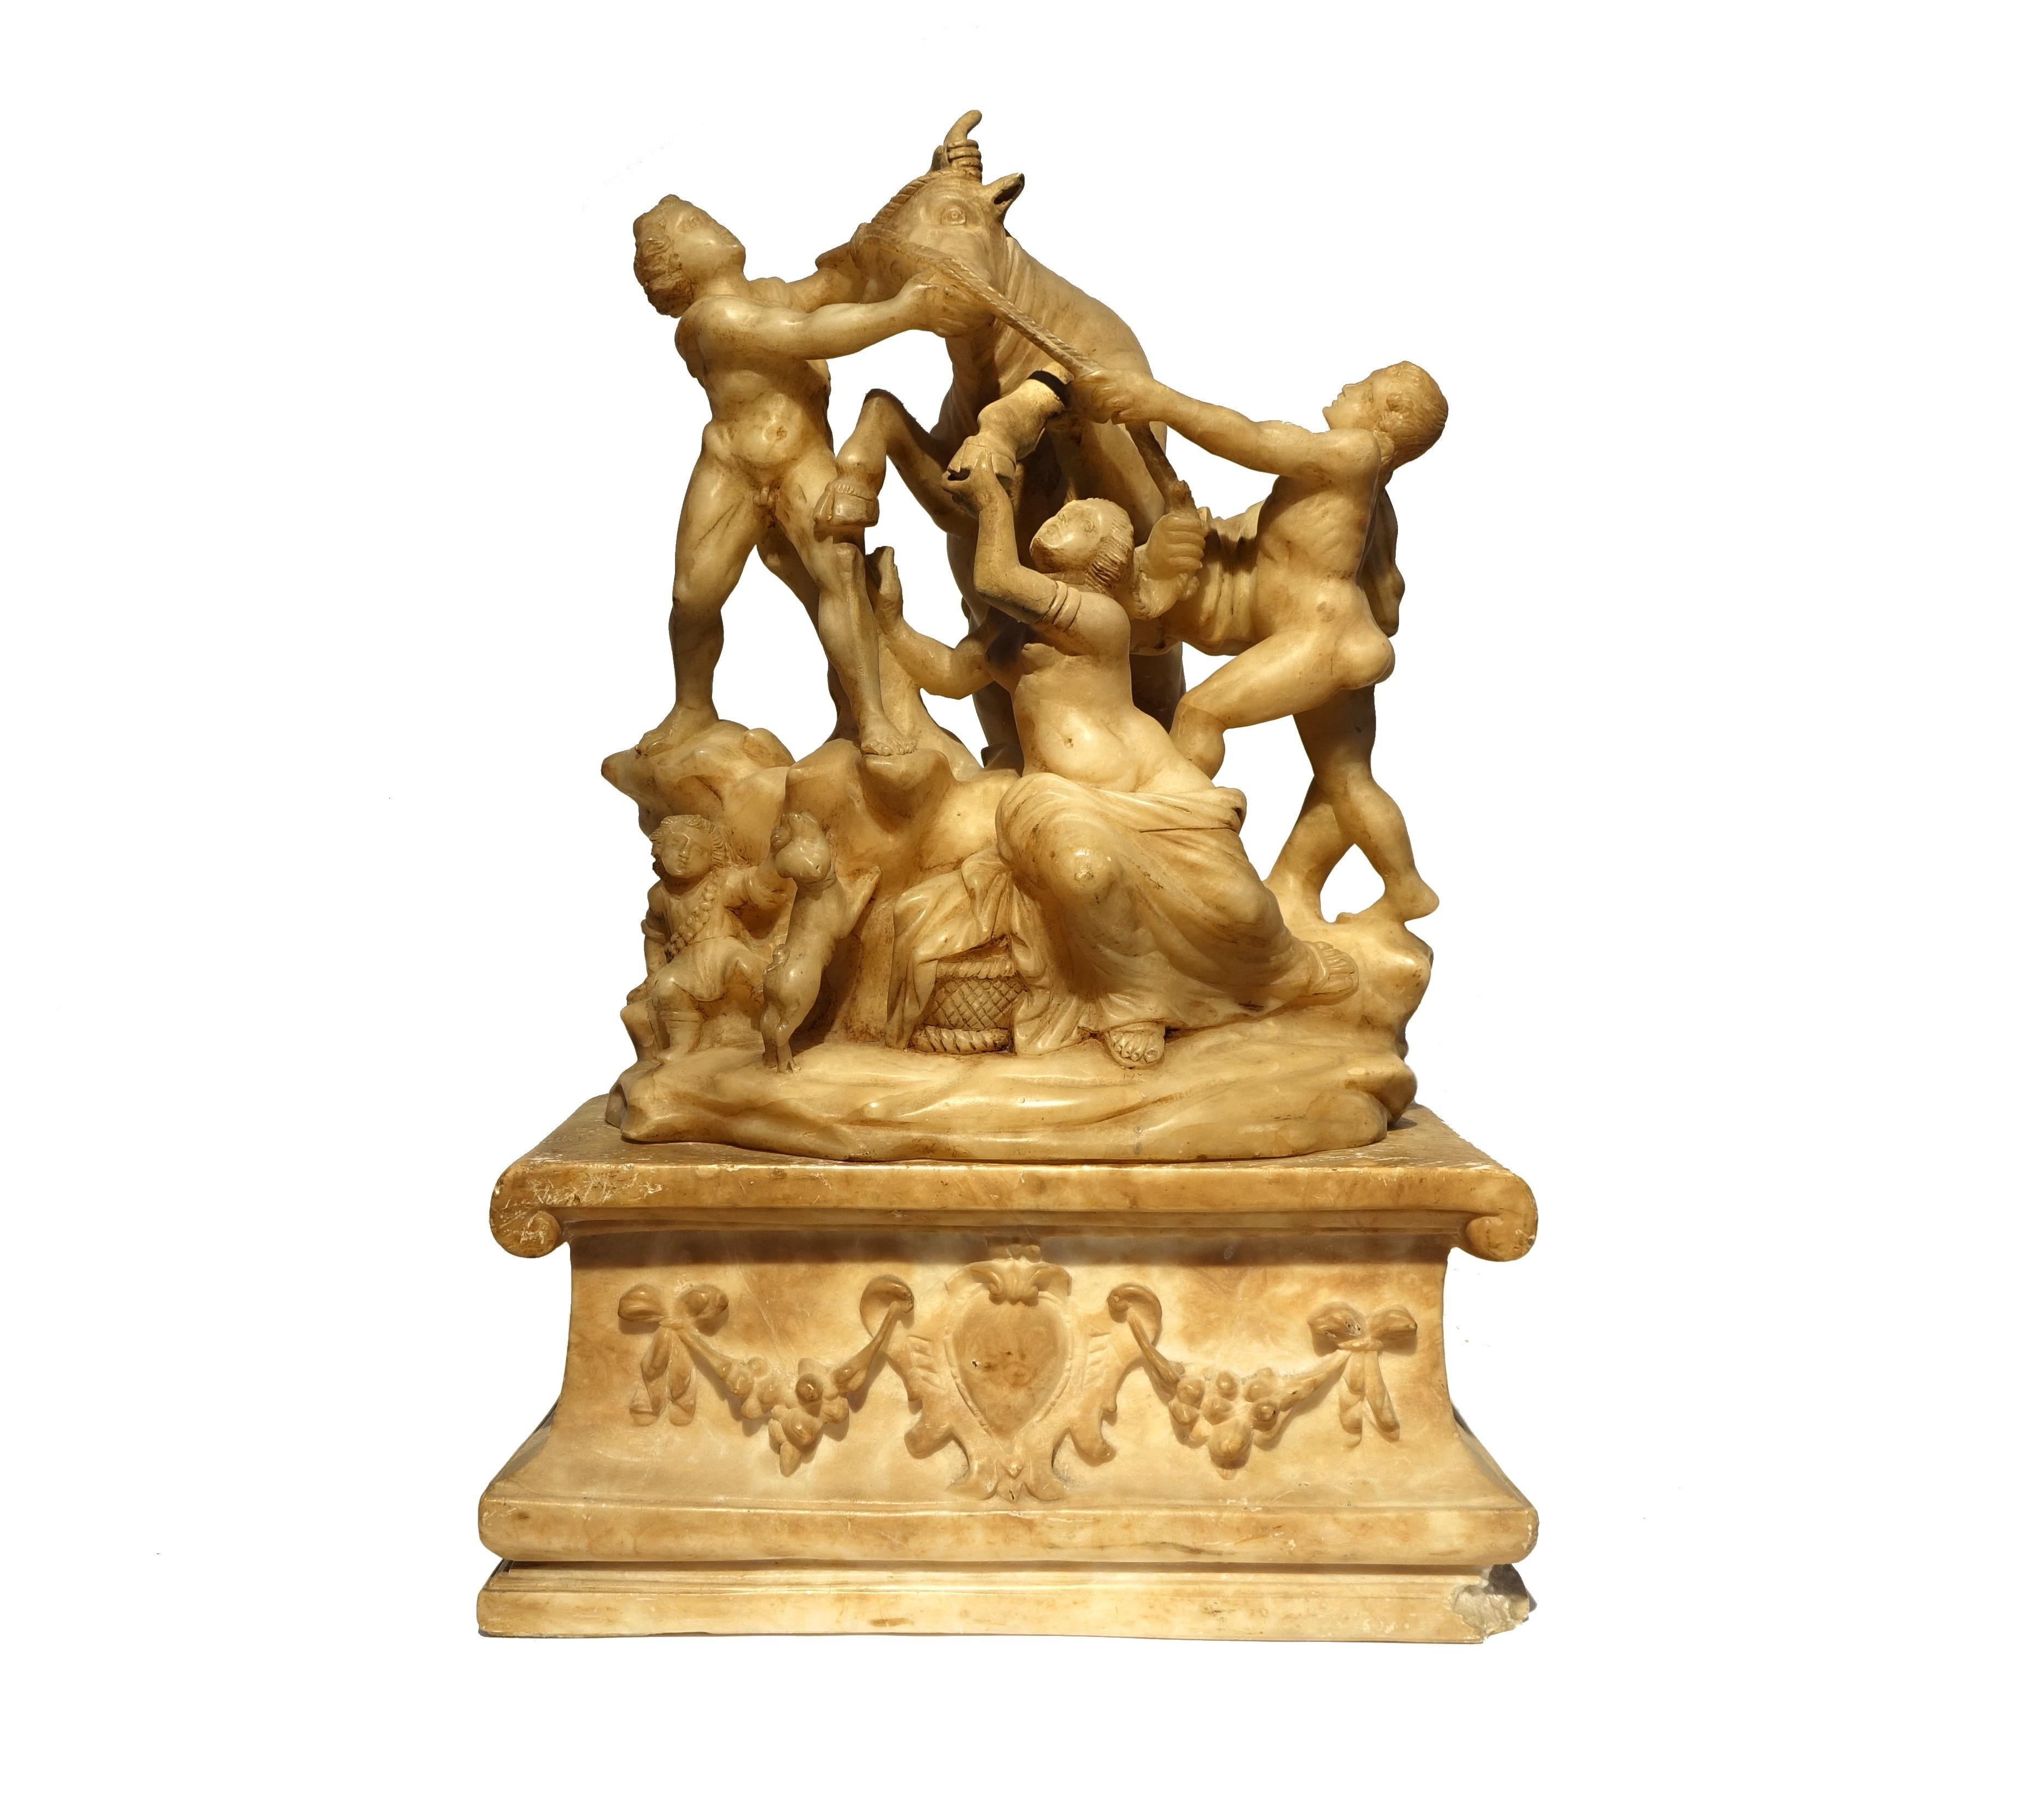 Alabaster sculpture composed of 2 elements.
The upper part derives from a reinterpretation of the Farnese Bull.
It has a nineteenth-century restoration on the left front leg of the bull that also involves the left arm of the central woman, but